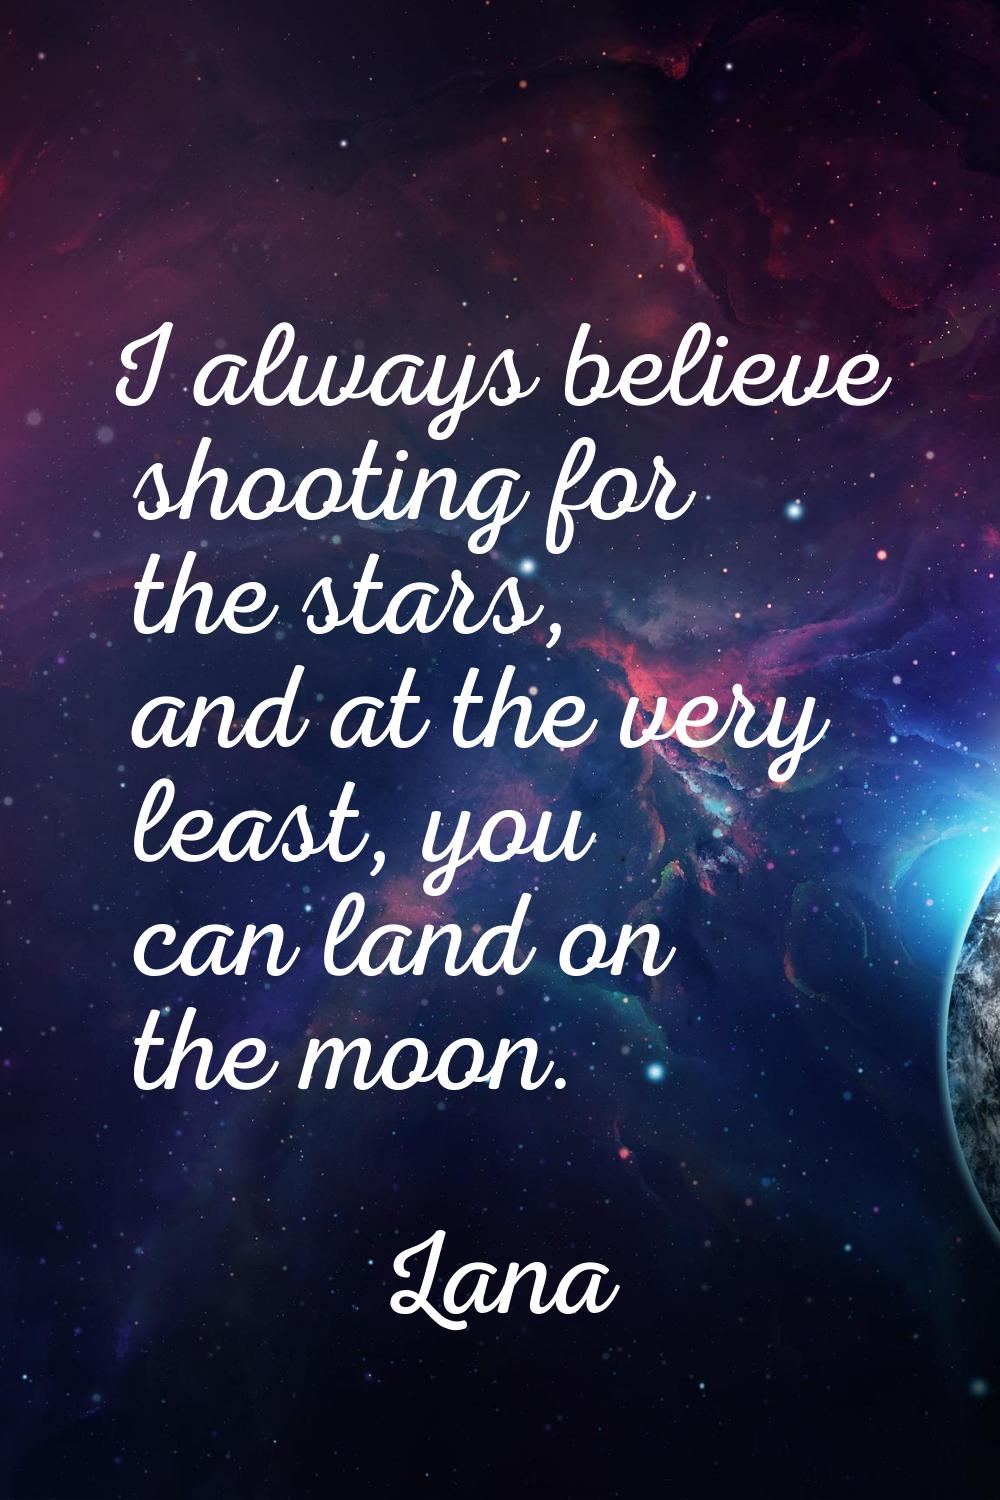 I always believe shooting for the stars, and at the very least, you can land on the moon.